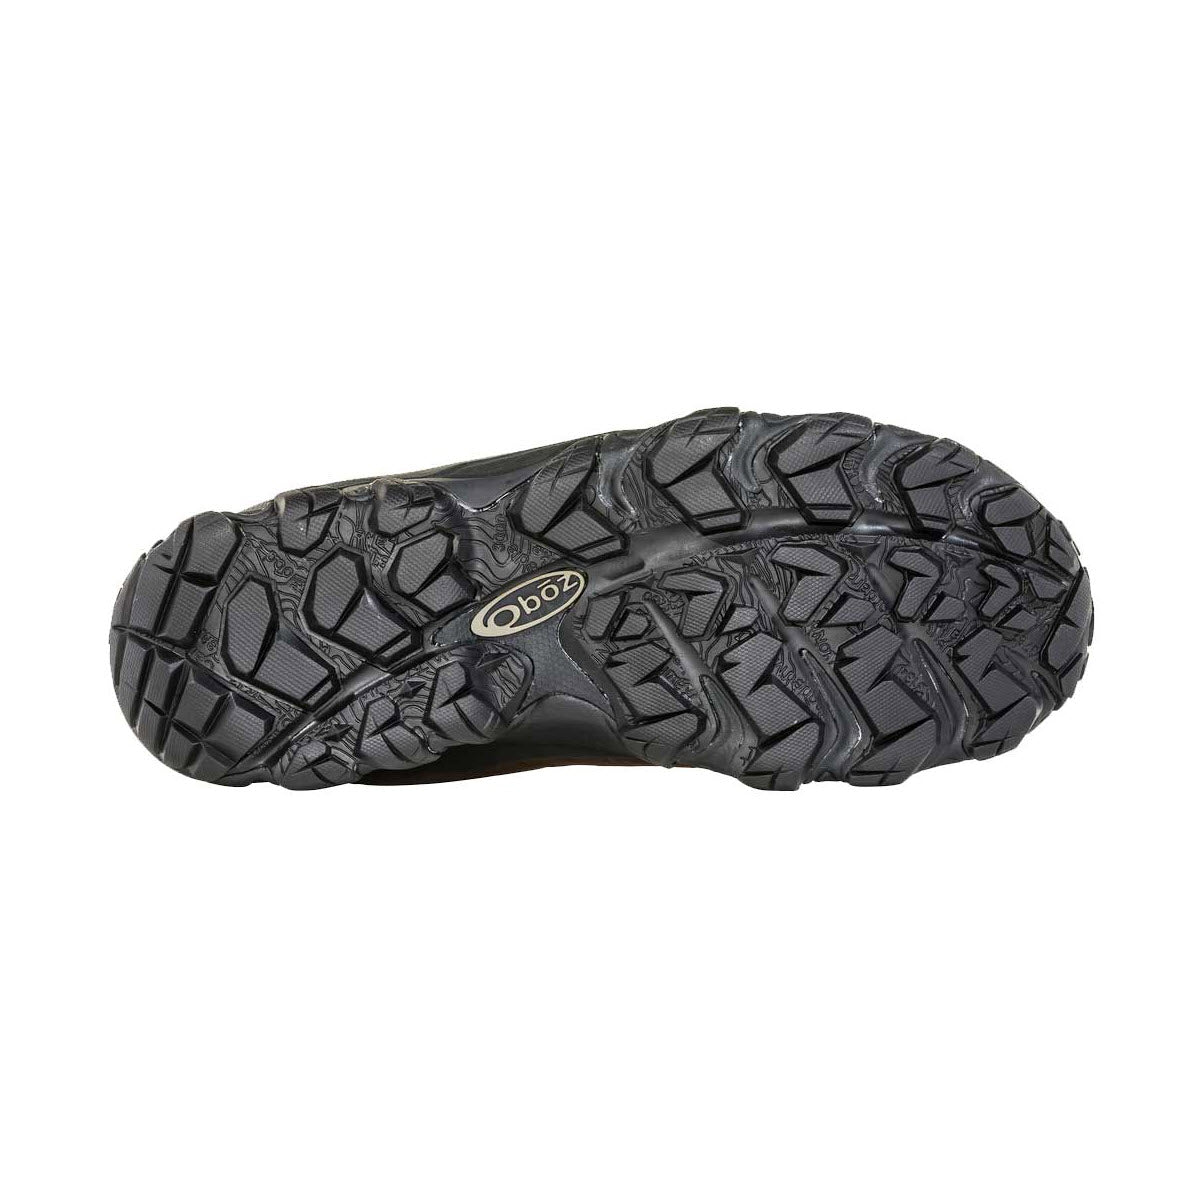 Sole view of a black OBOZ BRIDGER 10&quot; INSULATED B-DRY BARK - MENS hiking shoe showcasing its tread pattern and brand logo.